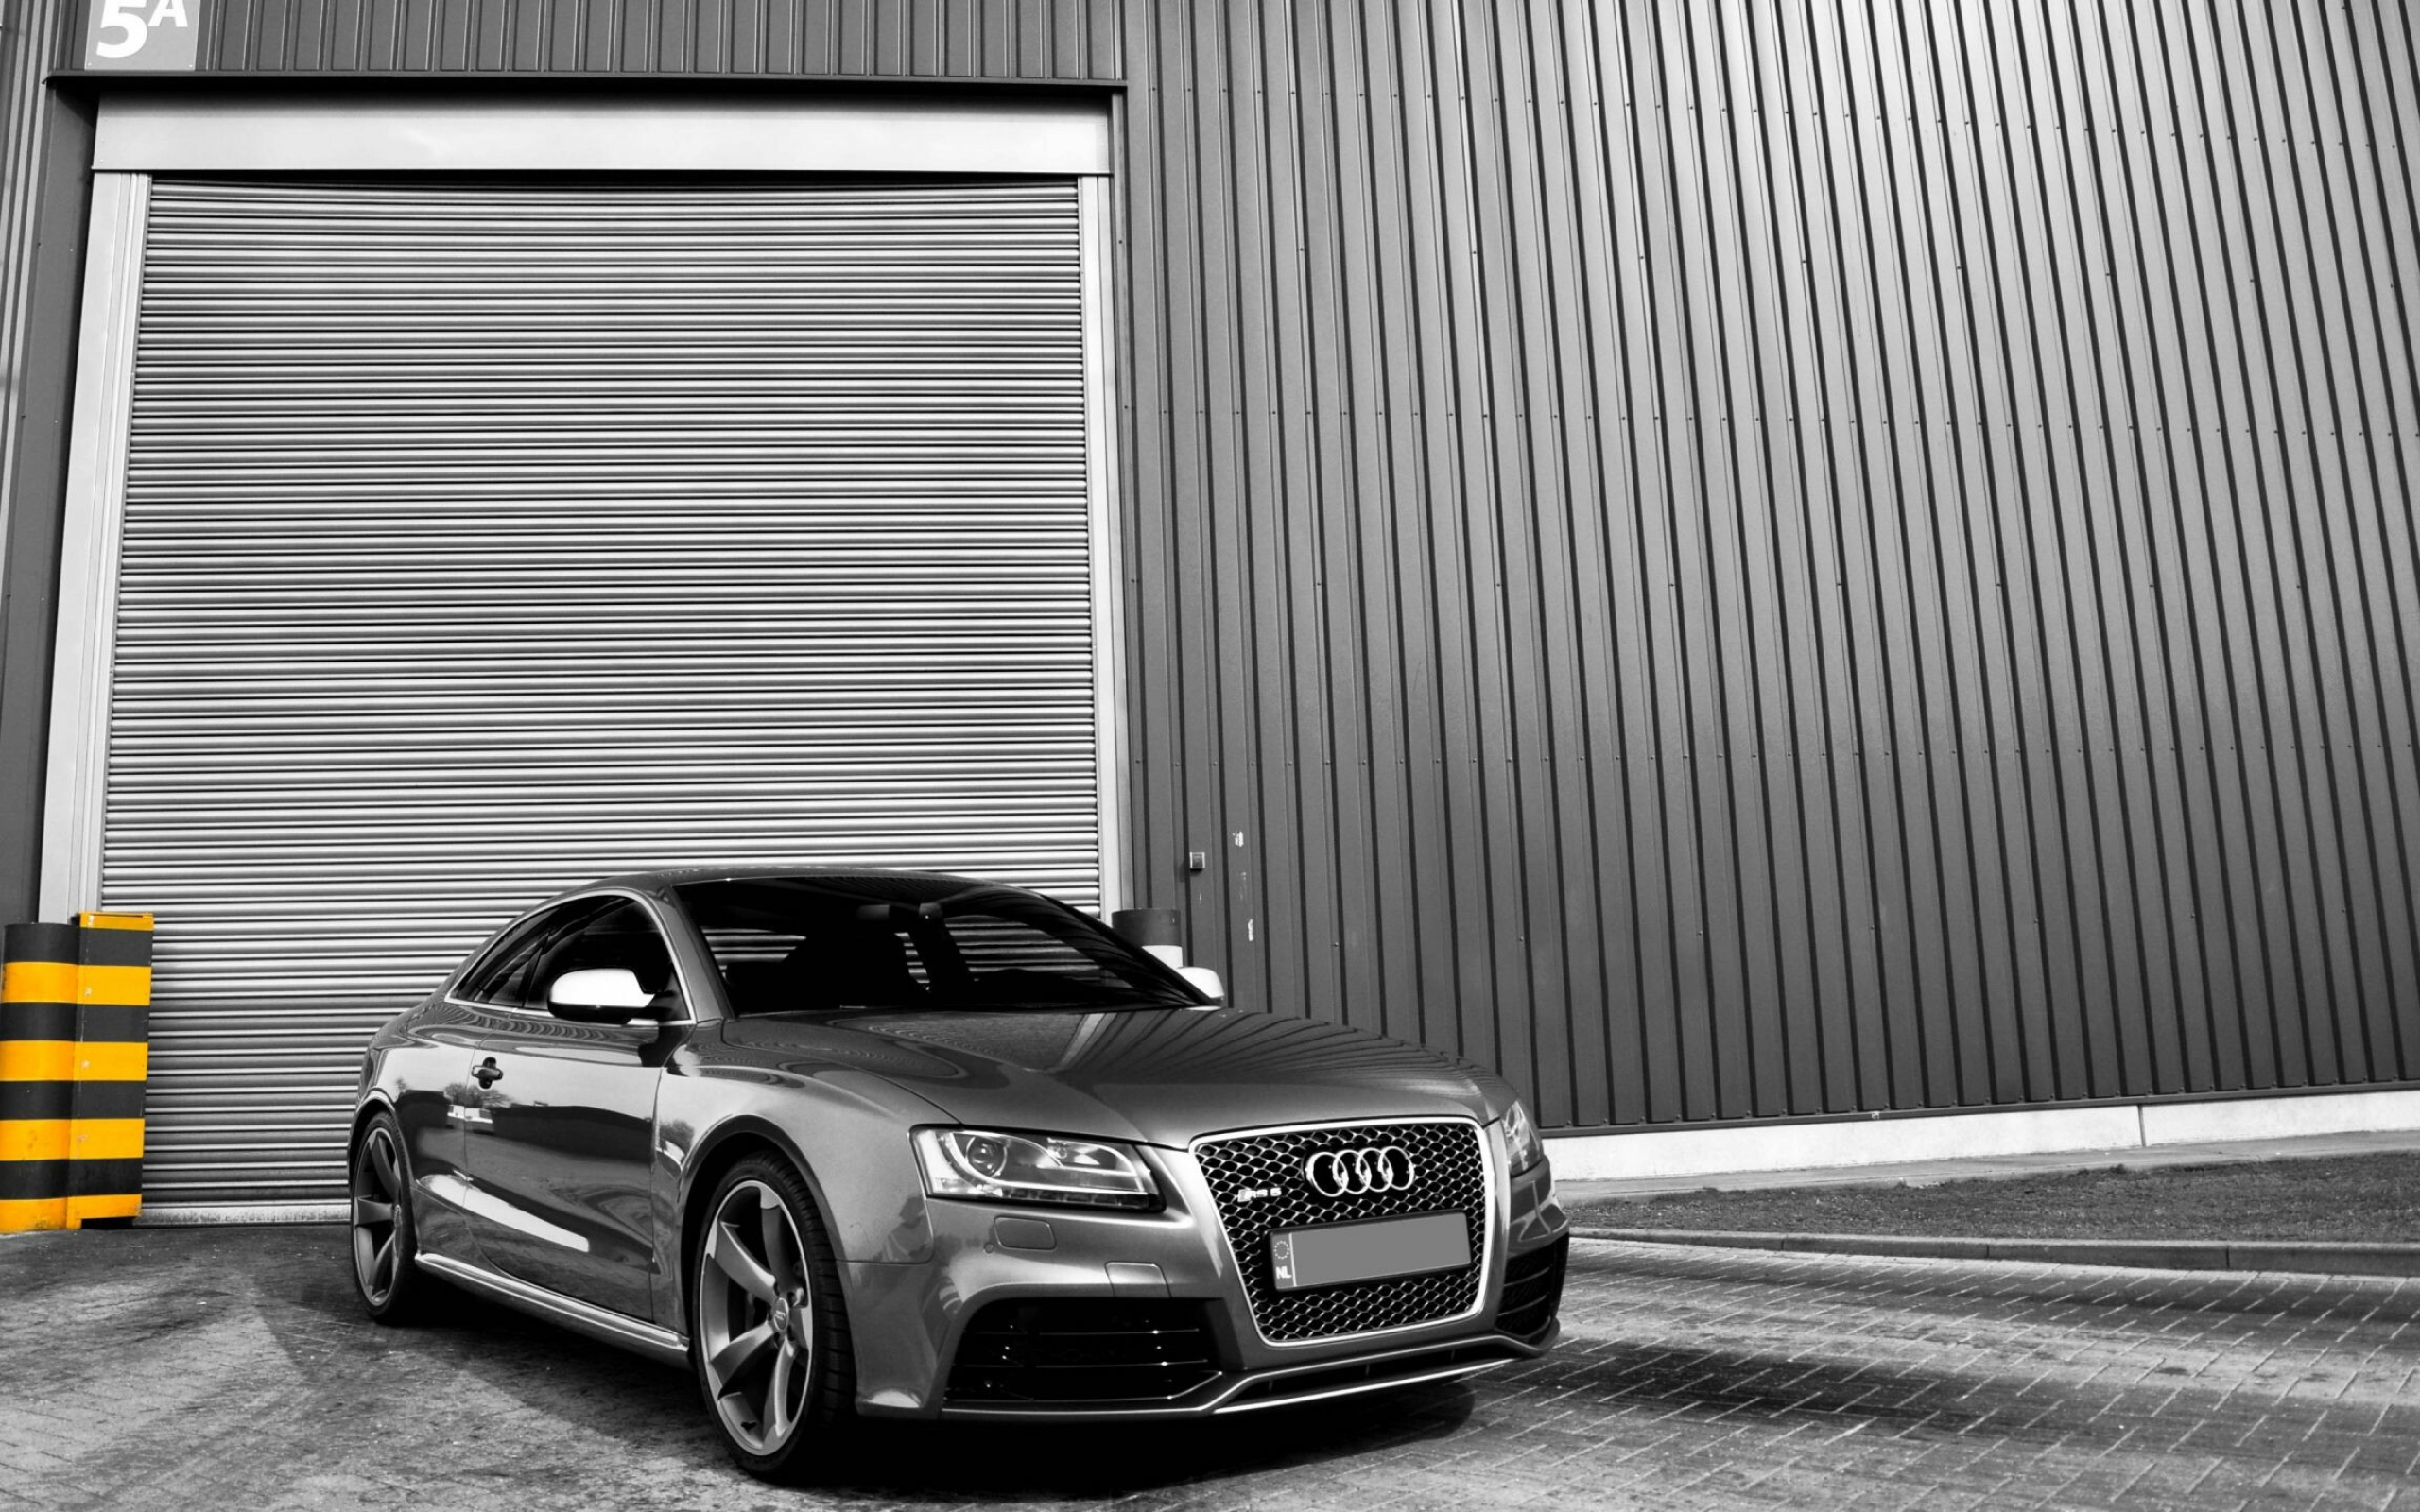 Audi: The part of the “German Big 3” luxury automakers, along with BMW and Mercedes-Benz. 2560x1600 HD Wallpaper.